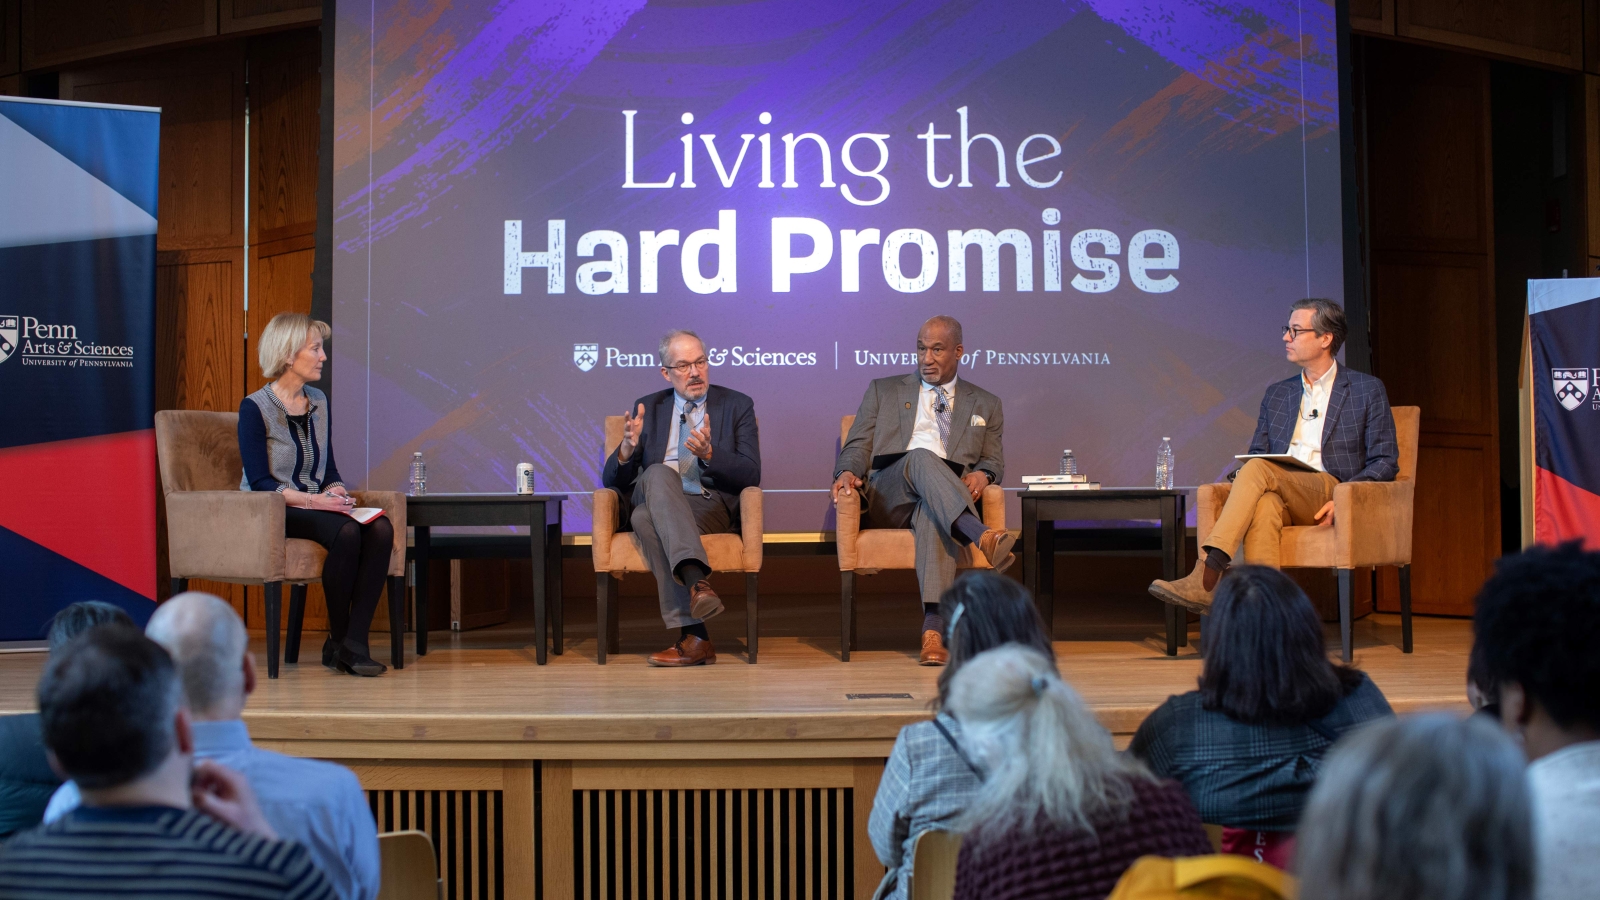 Laura Perna, Paul Sniegowski, Herman Bevears and Peter Struck seated on a stage in front of a crowd. Behind them is a screen displaying the words "Living the Hard Promise" as well as the Penn Arts and Sciences and University of Pennsylvania logos. Other panel members listen as Sniegowski speaks.